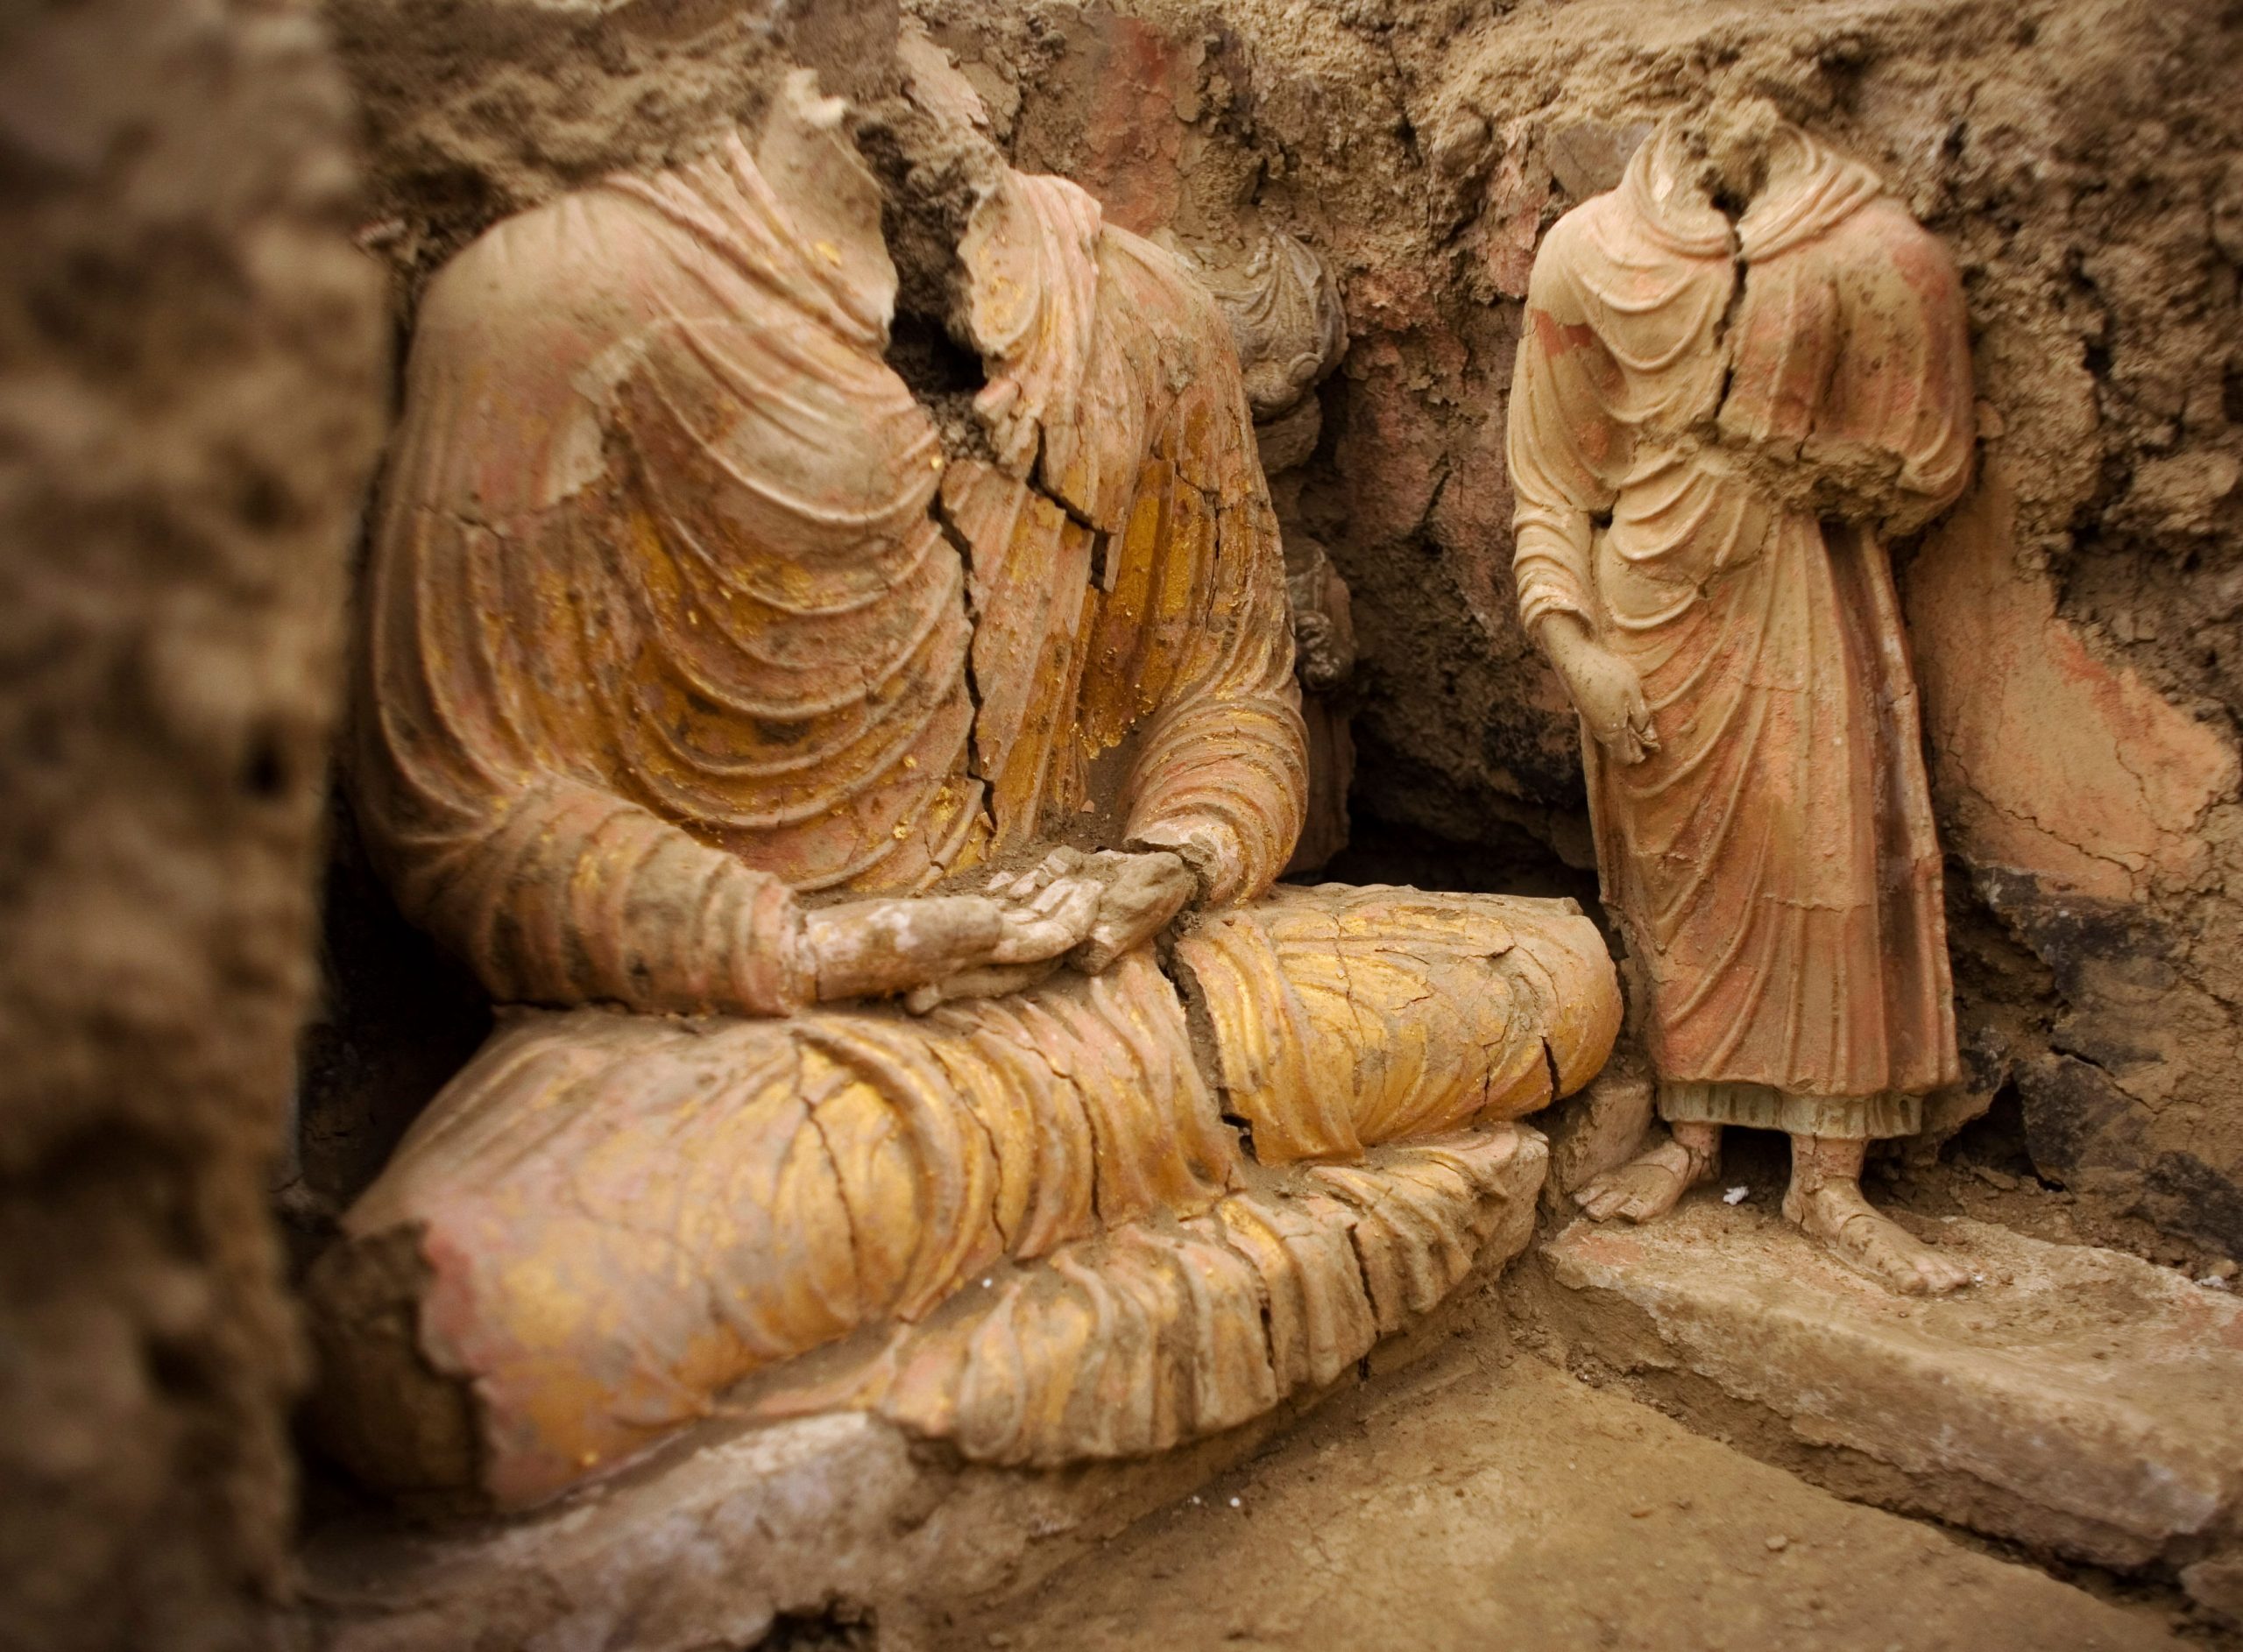 Taliban now preserving Buddhas, with hopes of Chinese investment